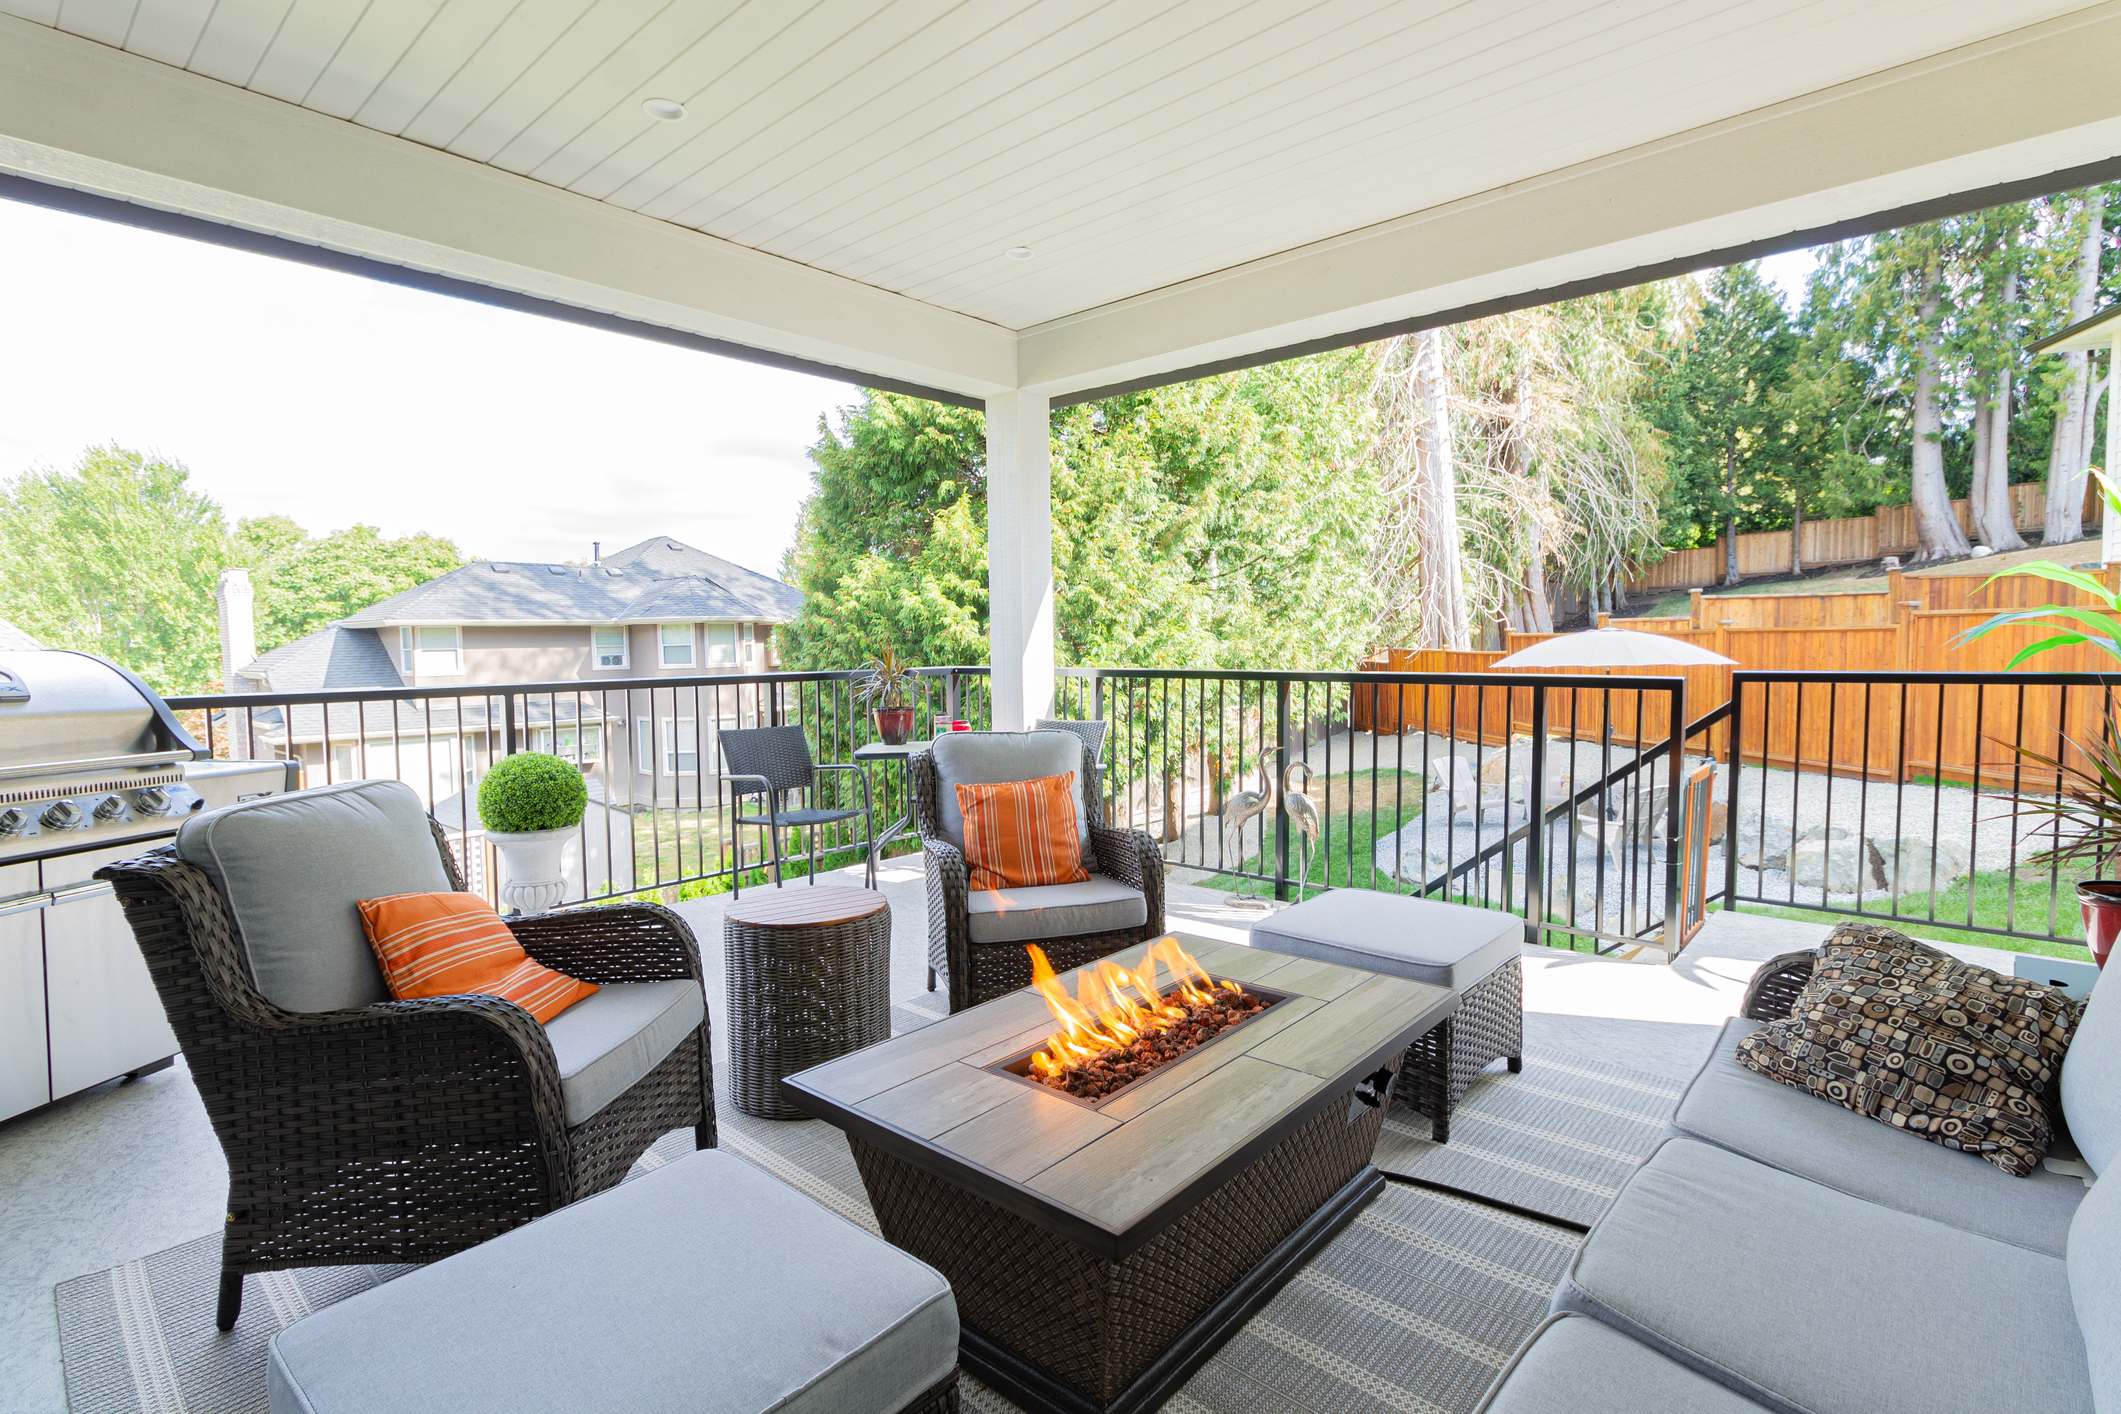 Extending your kiwi summer with an outdoor fireplace